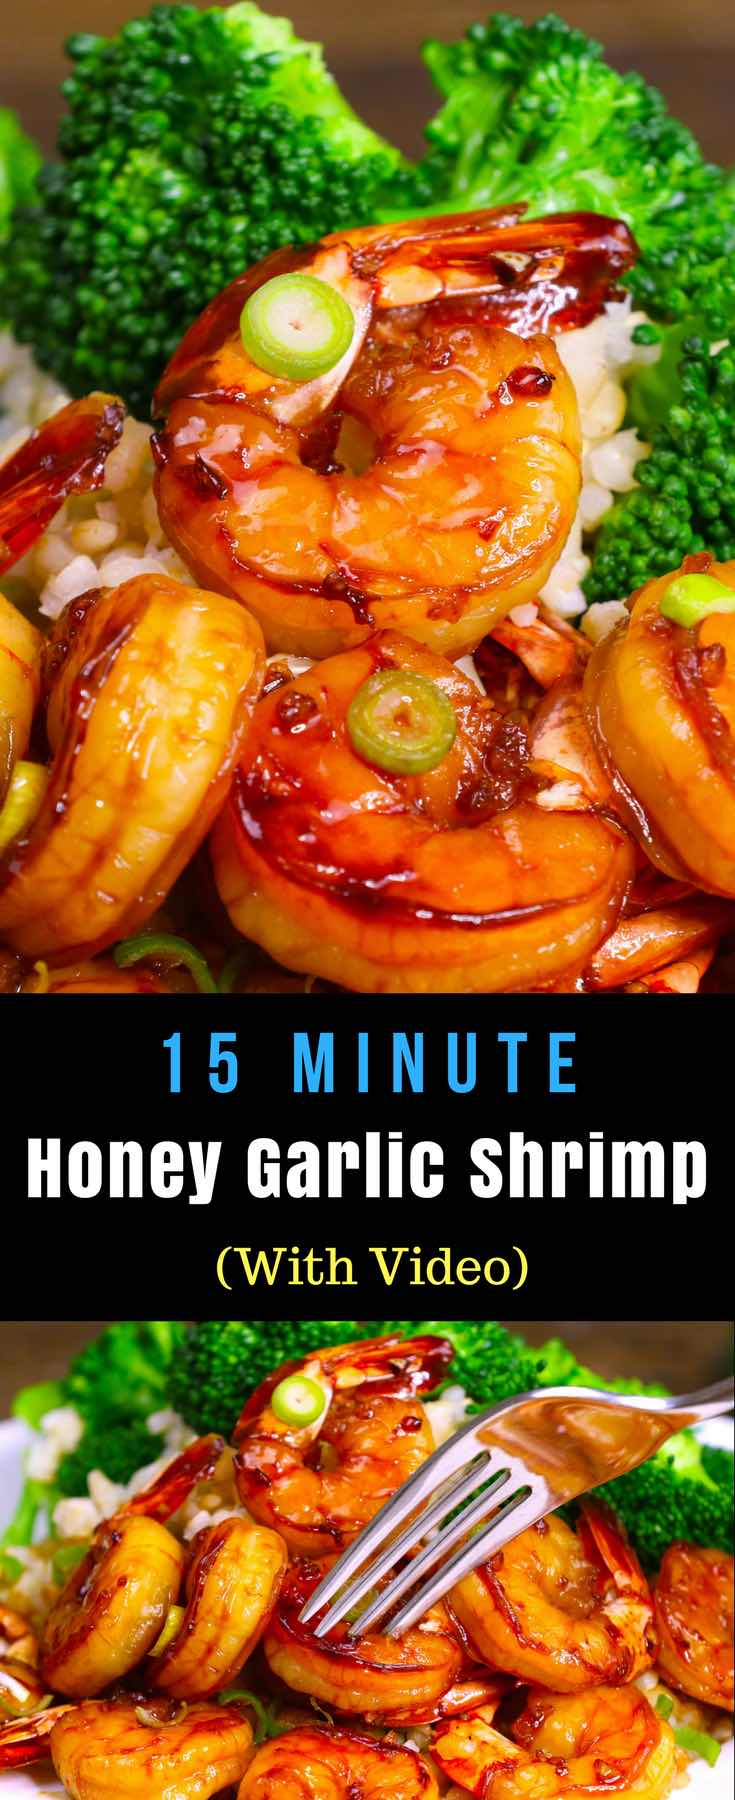 The easiest, most unbelievably delicious Honey Garlic Shrimp. And it’ll be on your dinner table in just 15 minutes. Succulent shrimp marinated in honey, garlic, soy sauce and ginger mix, seared in frying pan. Ready in 15 minutes! Quick and easy dinner recipe. #EasyShrimp #ShrimpRecipe